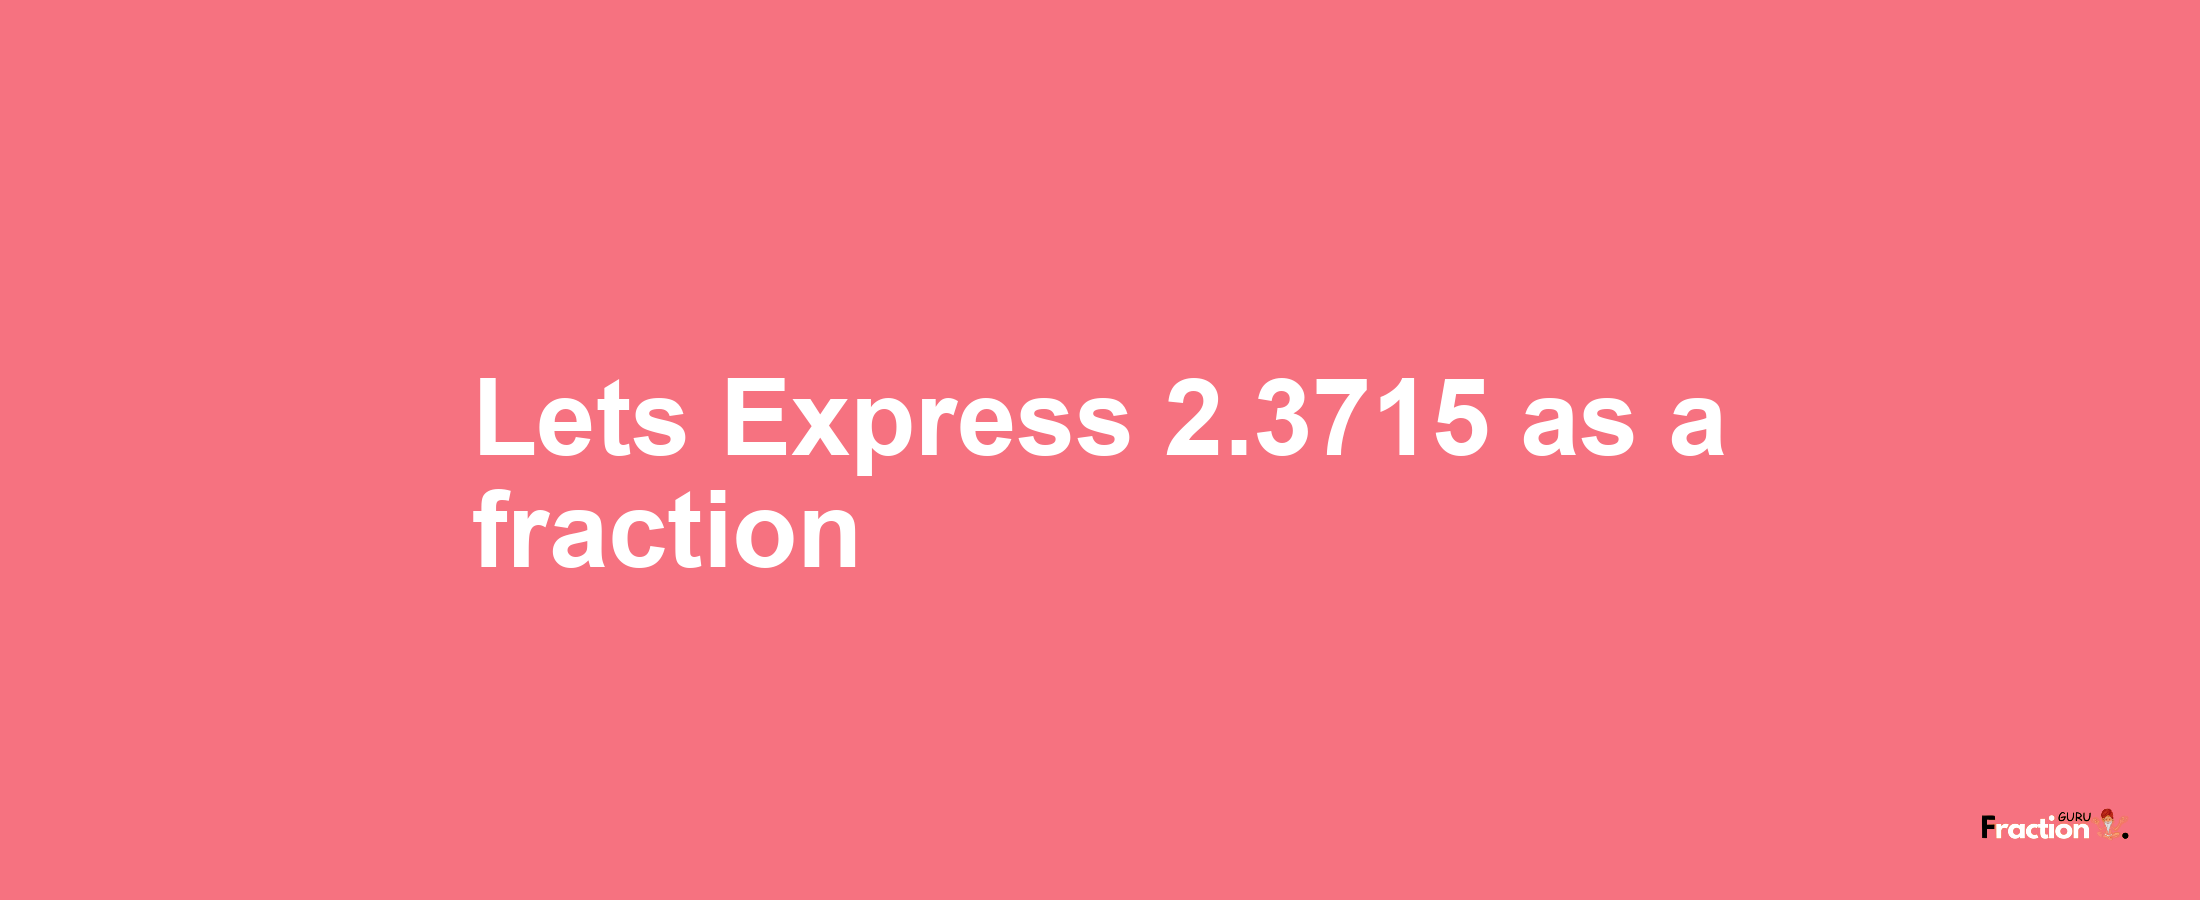 Lets Express 2.3715 as afraction